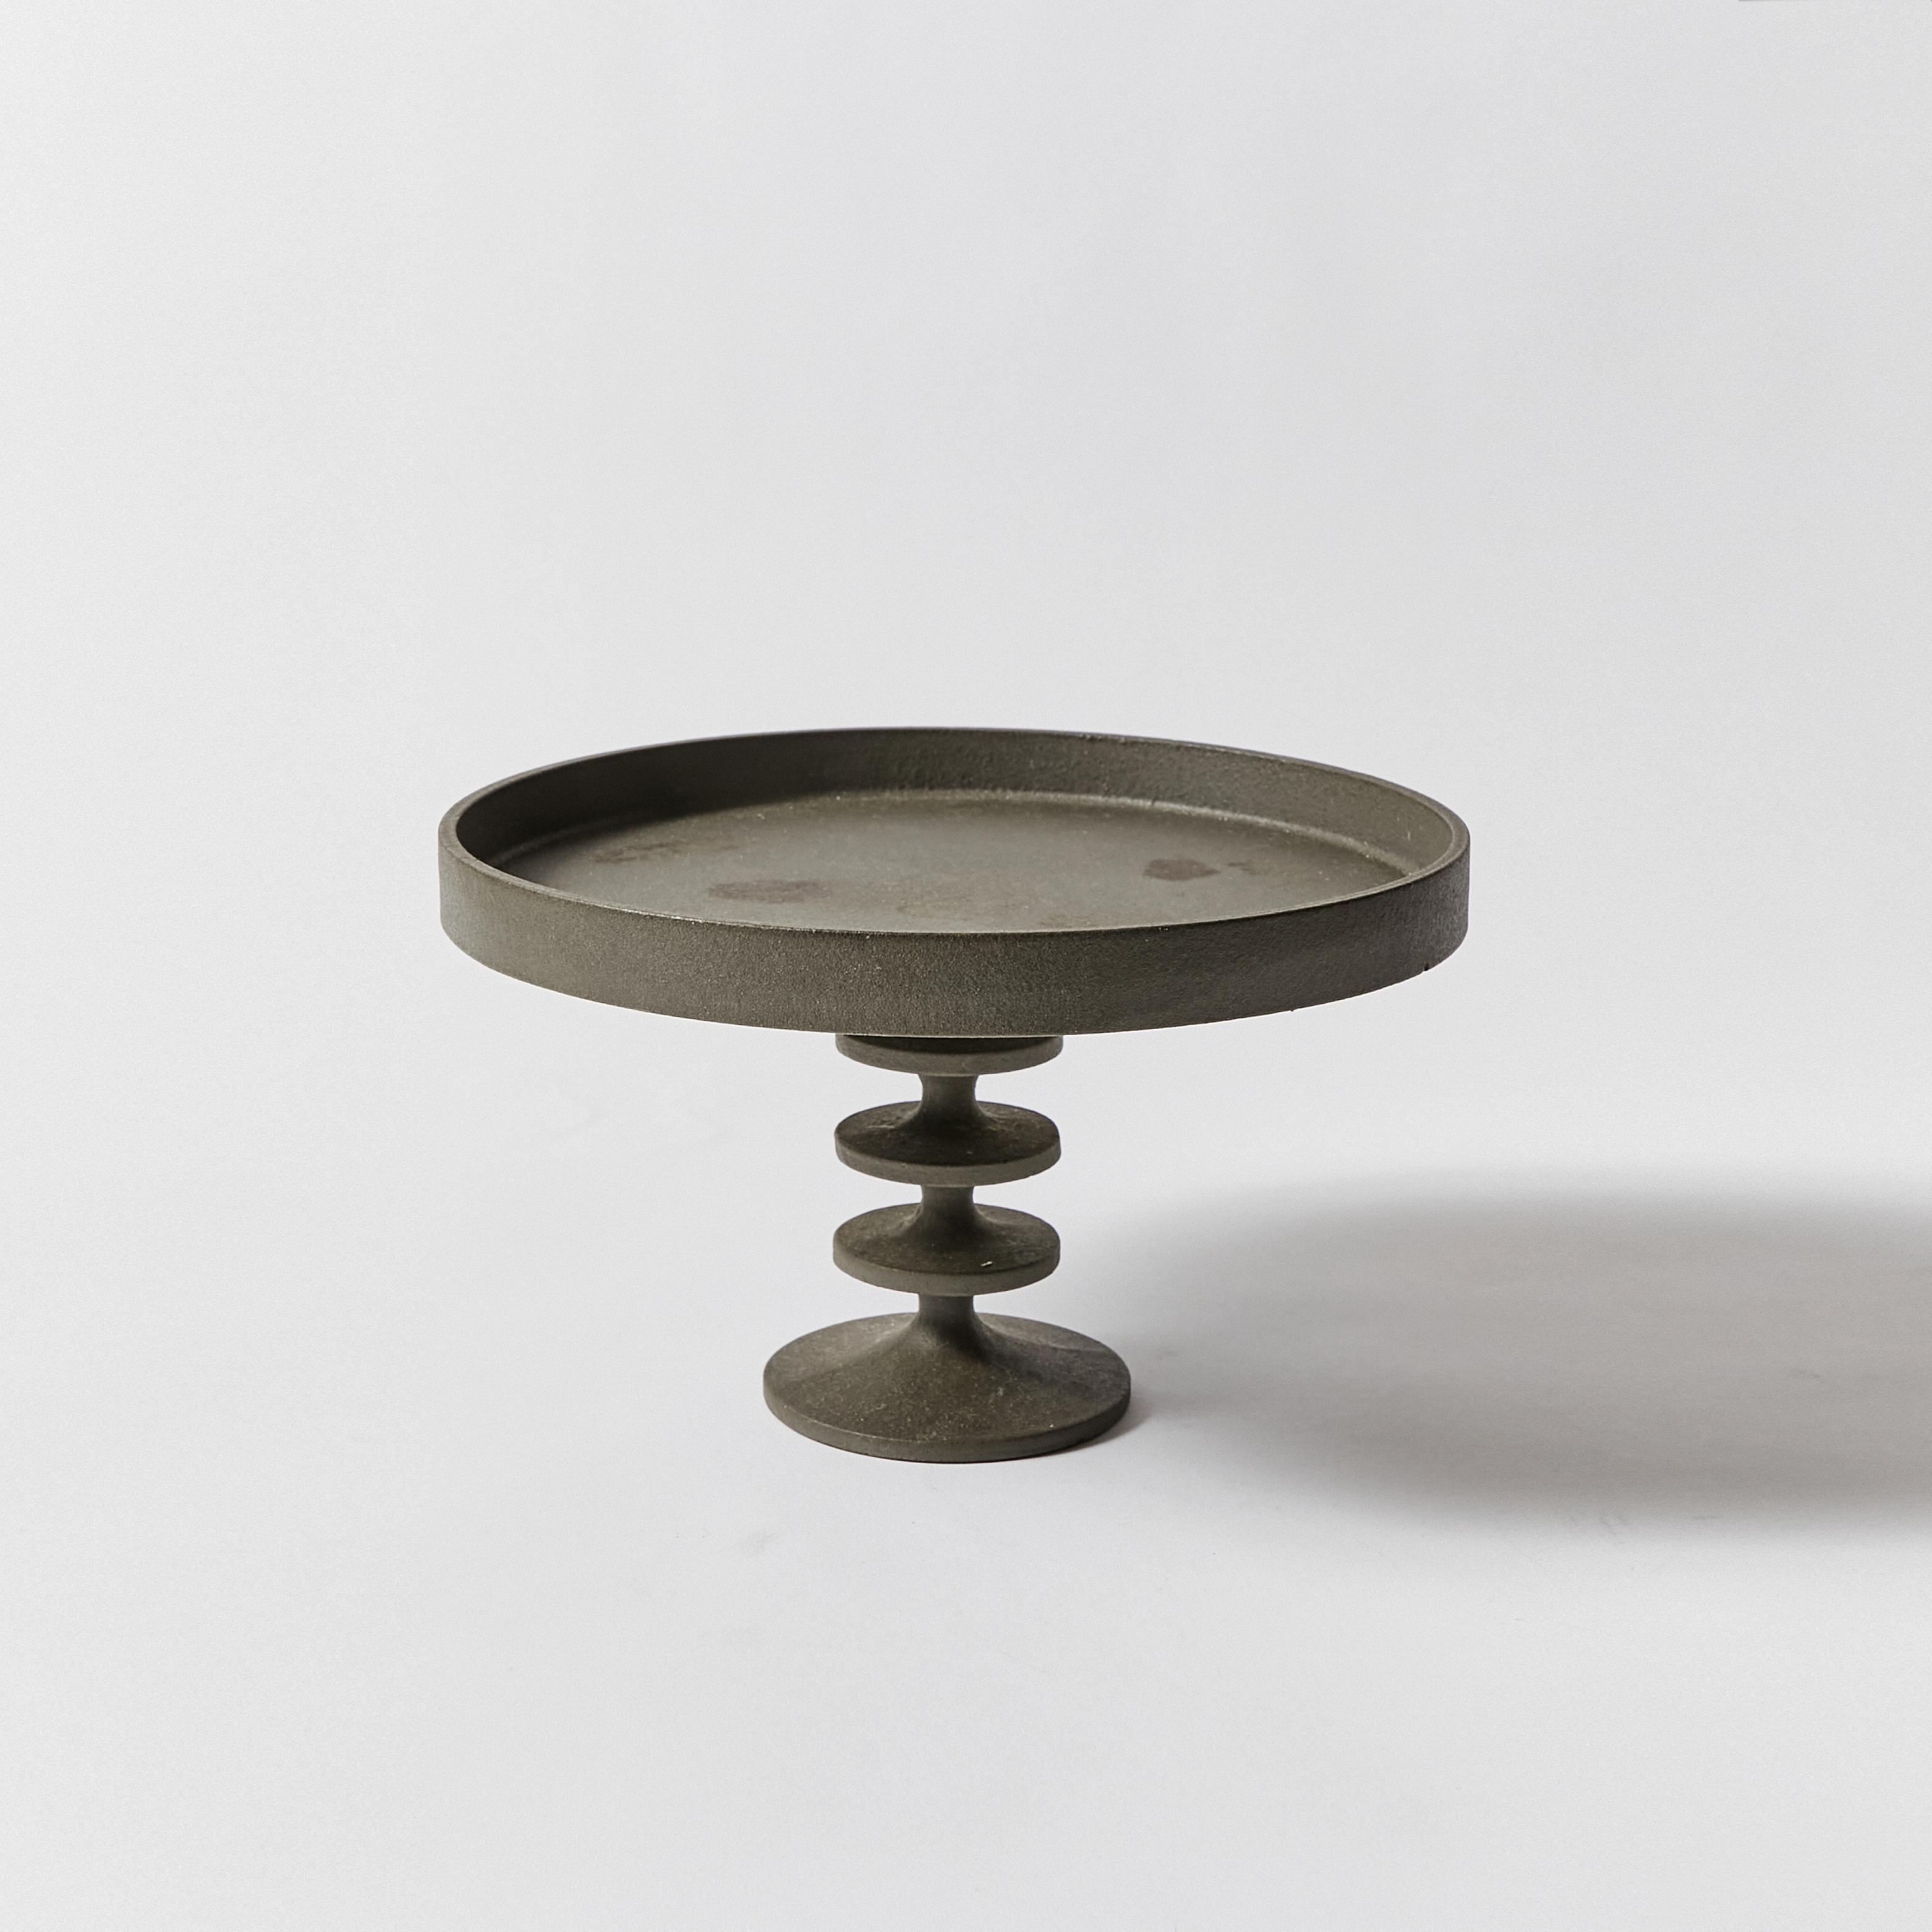 Cake stand made in blackened cast iron. Designed by Robert Welch. Signature stamp on bottom.